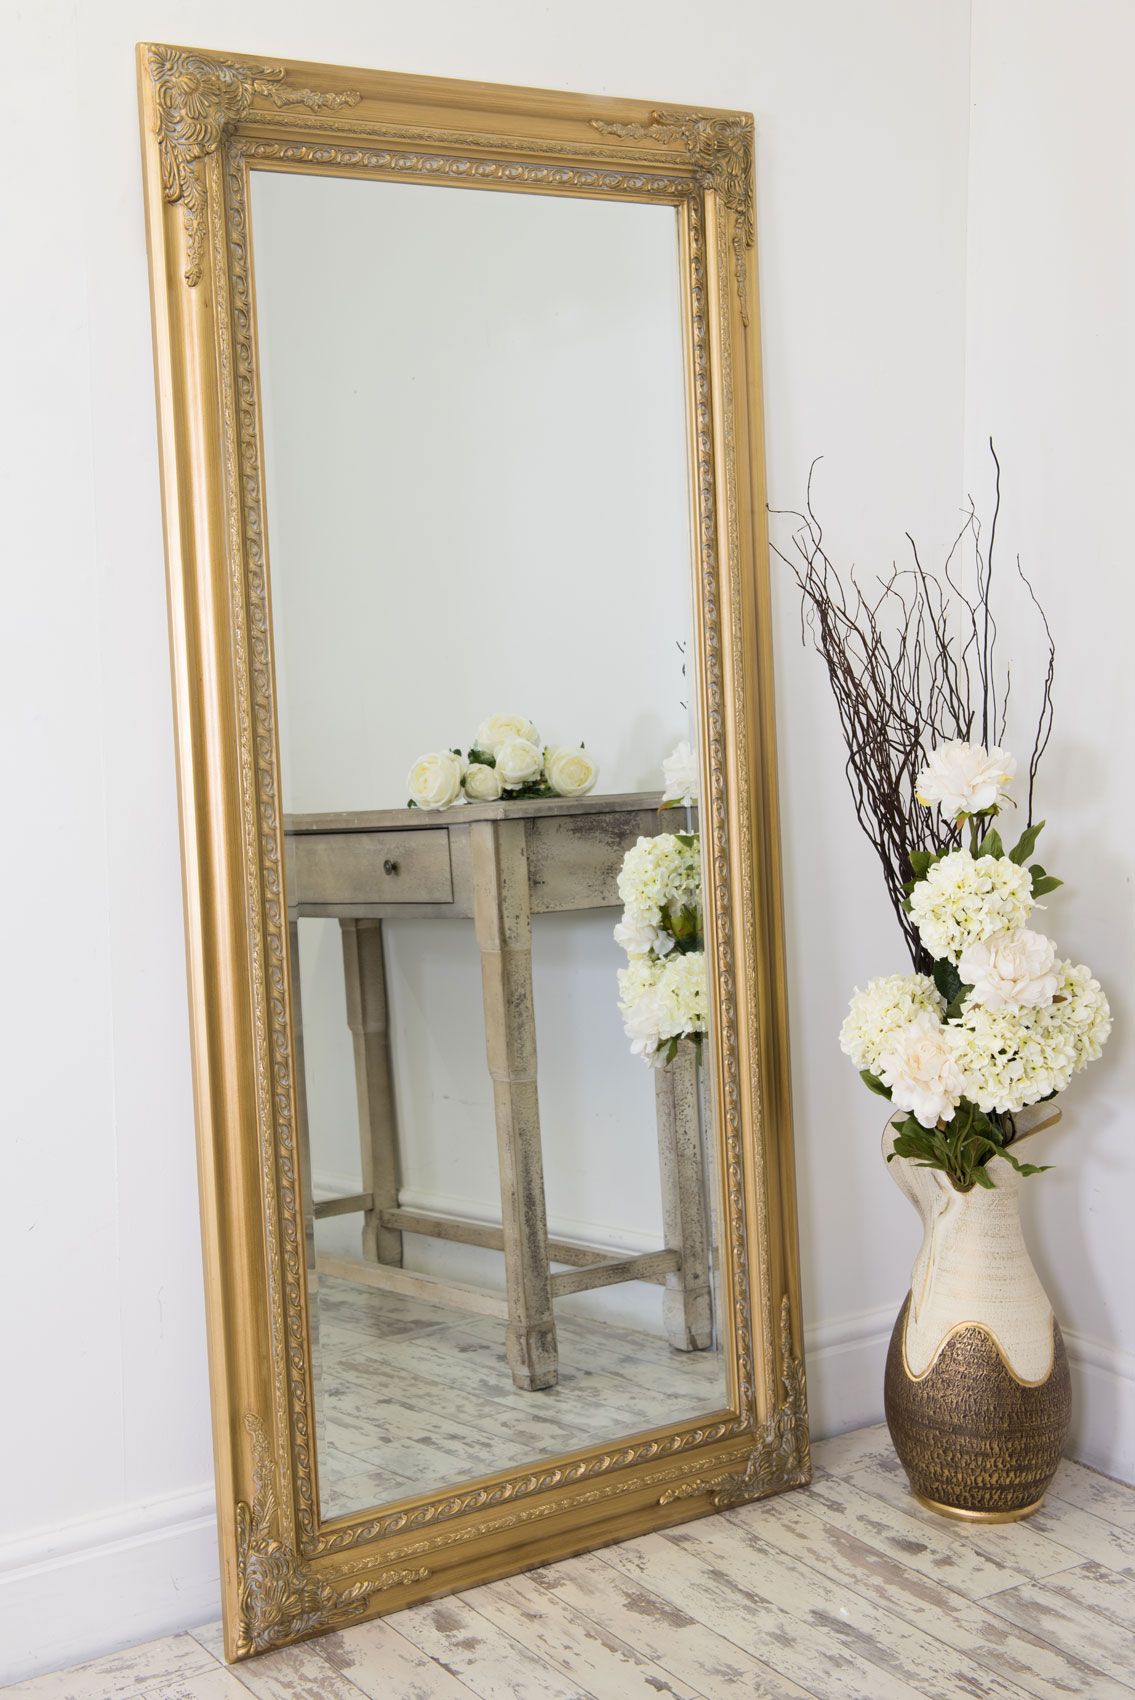 Extra Large Gold Antique Wall Mirror Full Length 5ft10 X 2ft10 178cm X In Antique Gold Scallop Wall Mirrors (View 15 of 15)